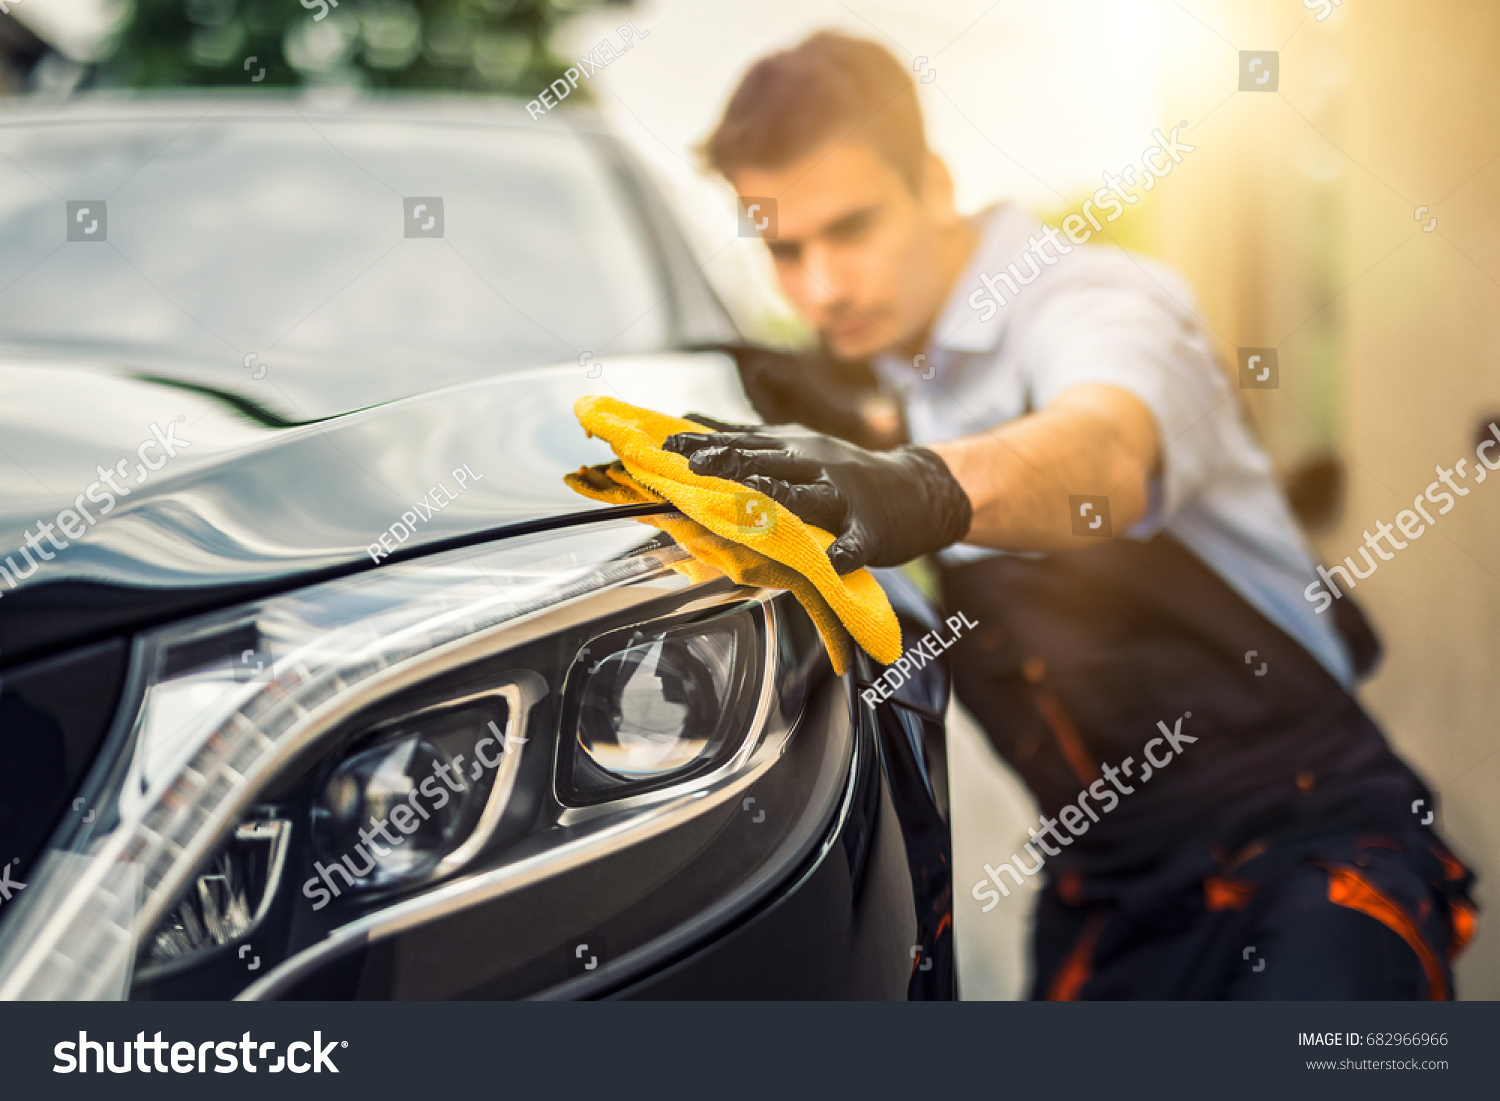 Car detailing - the man holds the microfiber in hand and polishes the car. Selective focus. #682966966